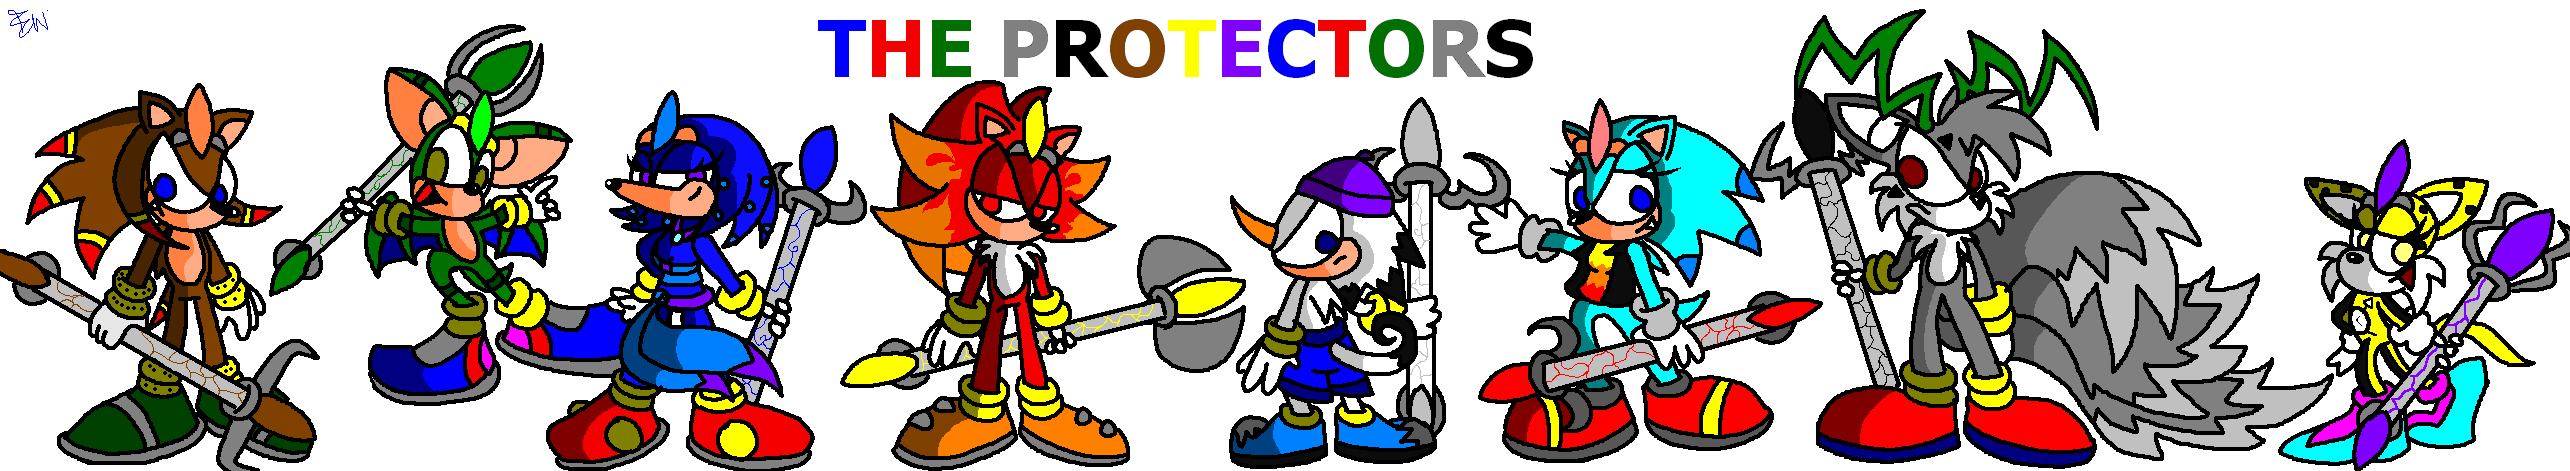 The Protectors by Edge14